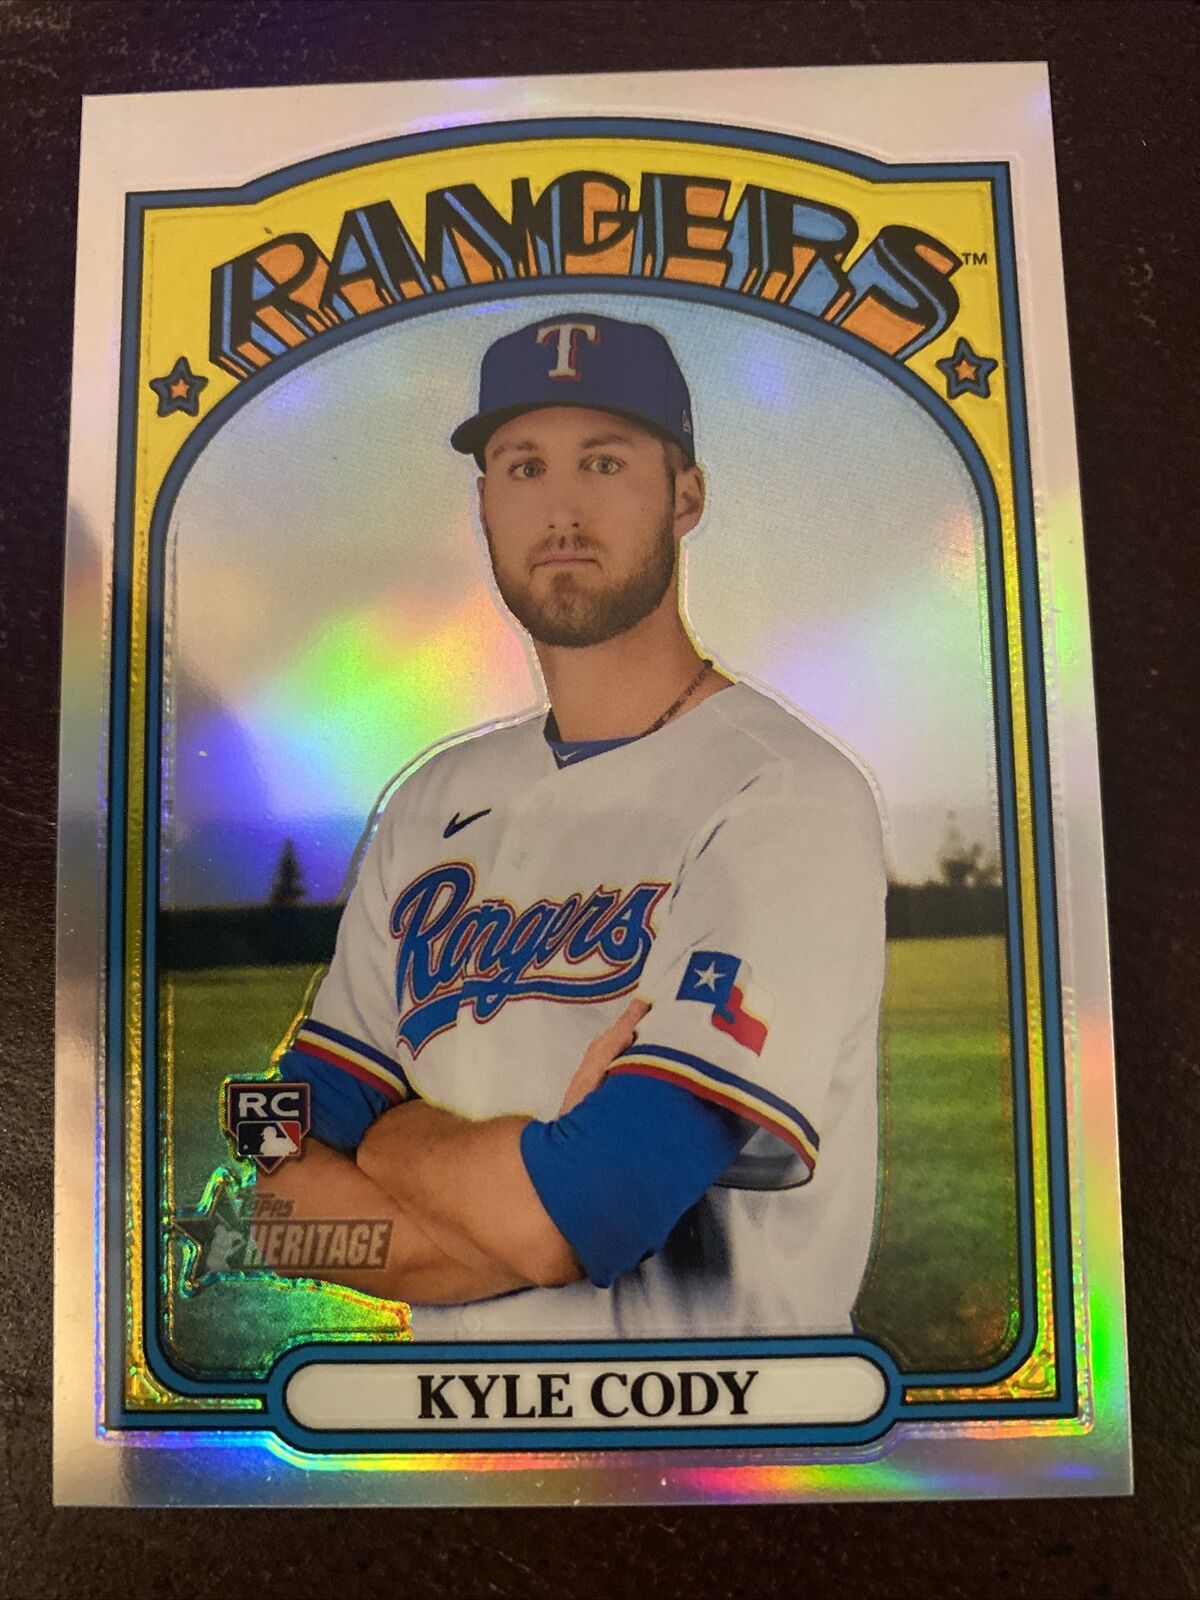 2021 Topps Heritage High Number Kyle Cody RC Rookie Chrome Refractor #208/572